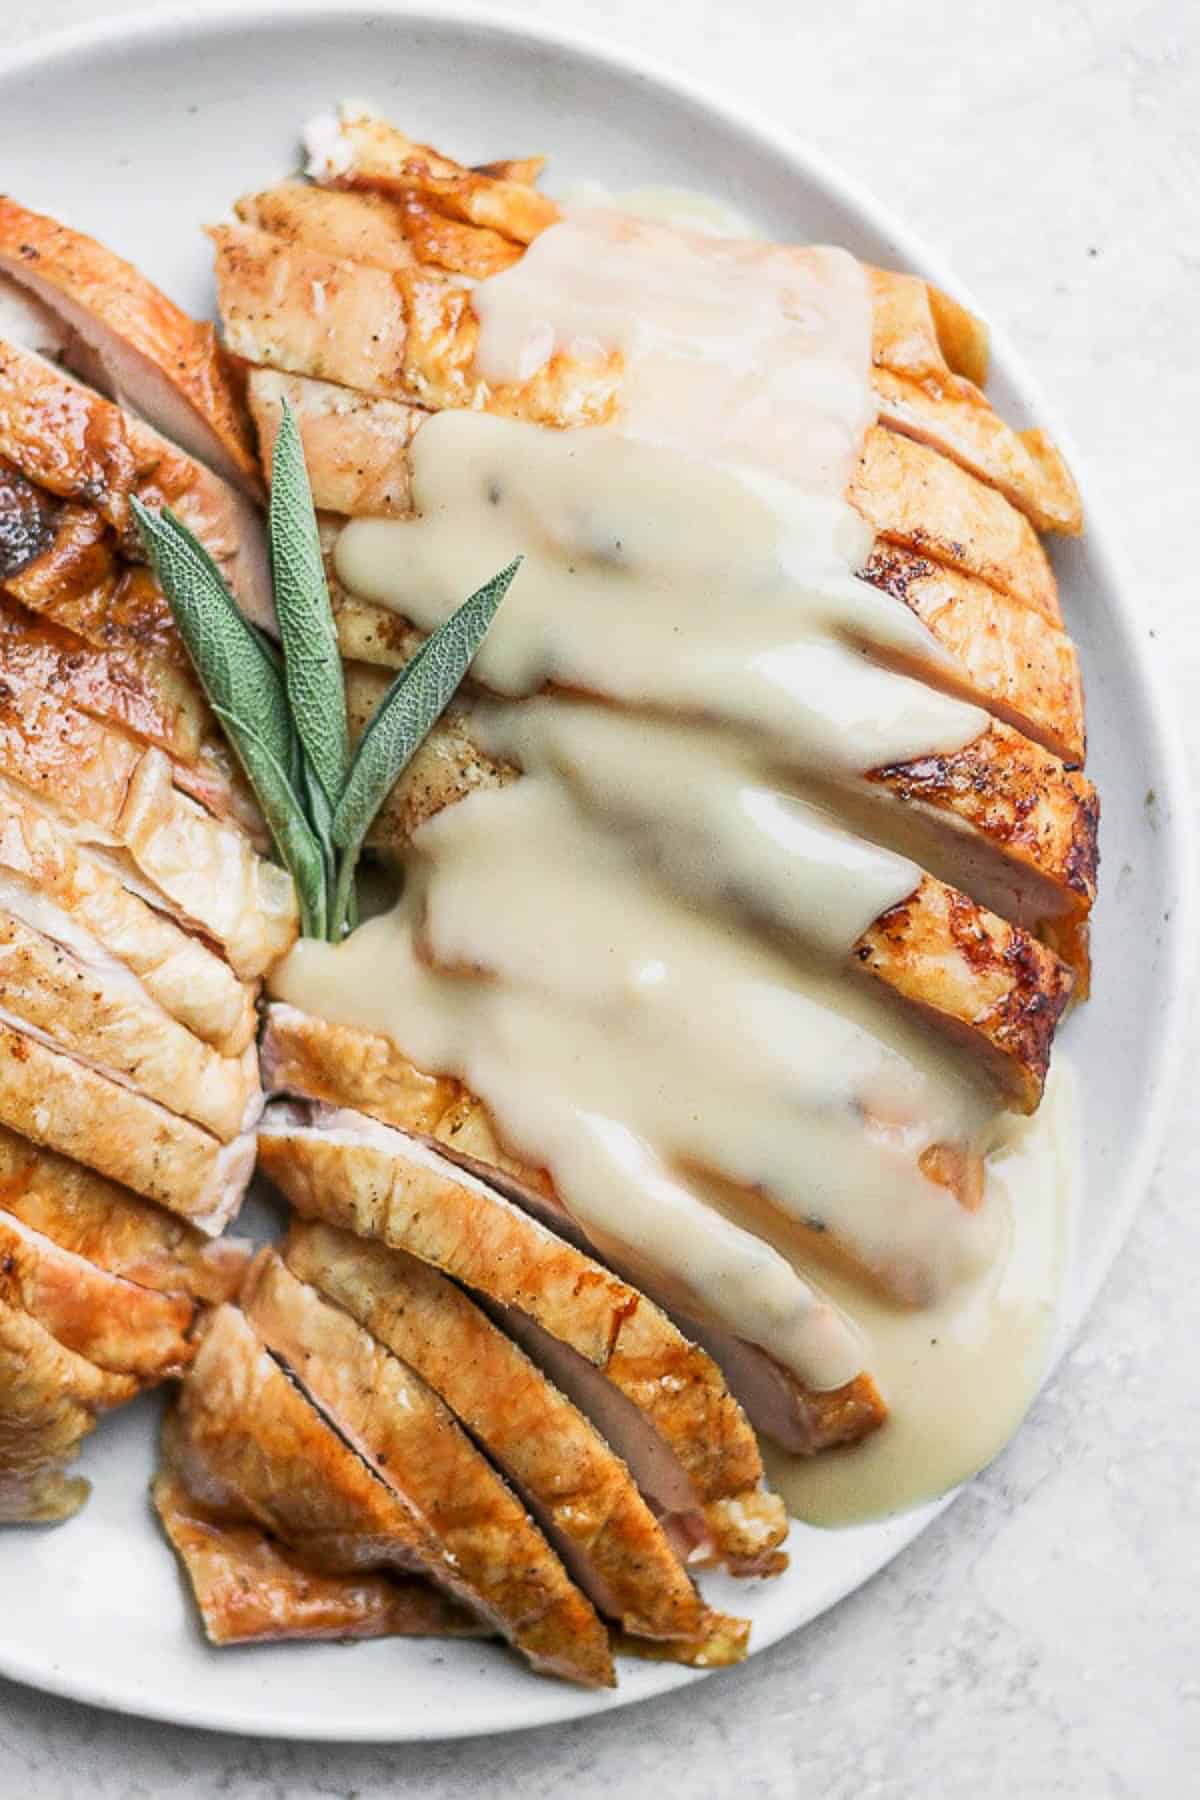 A sliced smoked turkey breast covered with gravy and garnished with sage leaves.